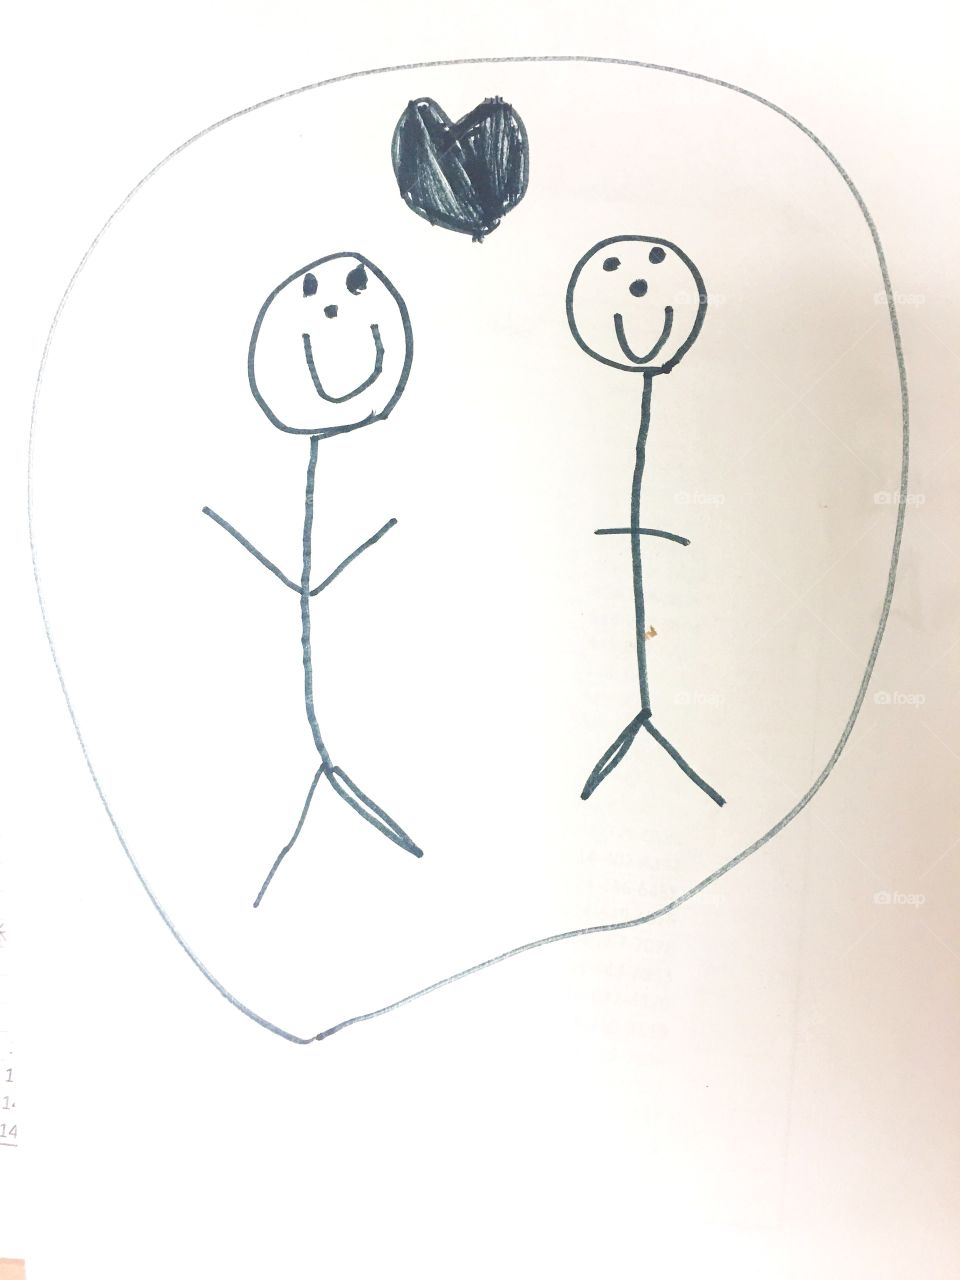 Teacher and student picture drawn by student. 